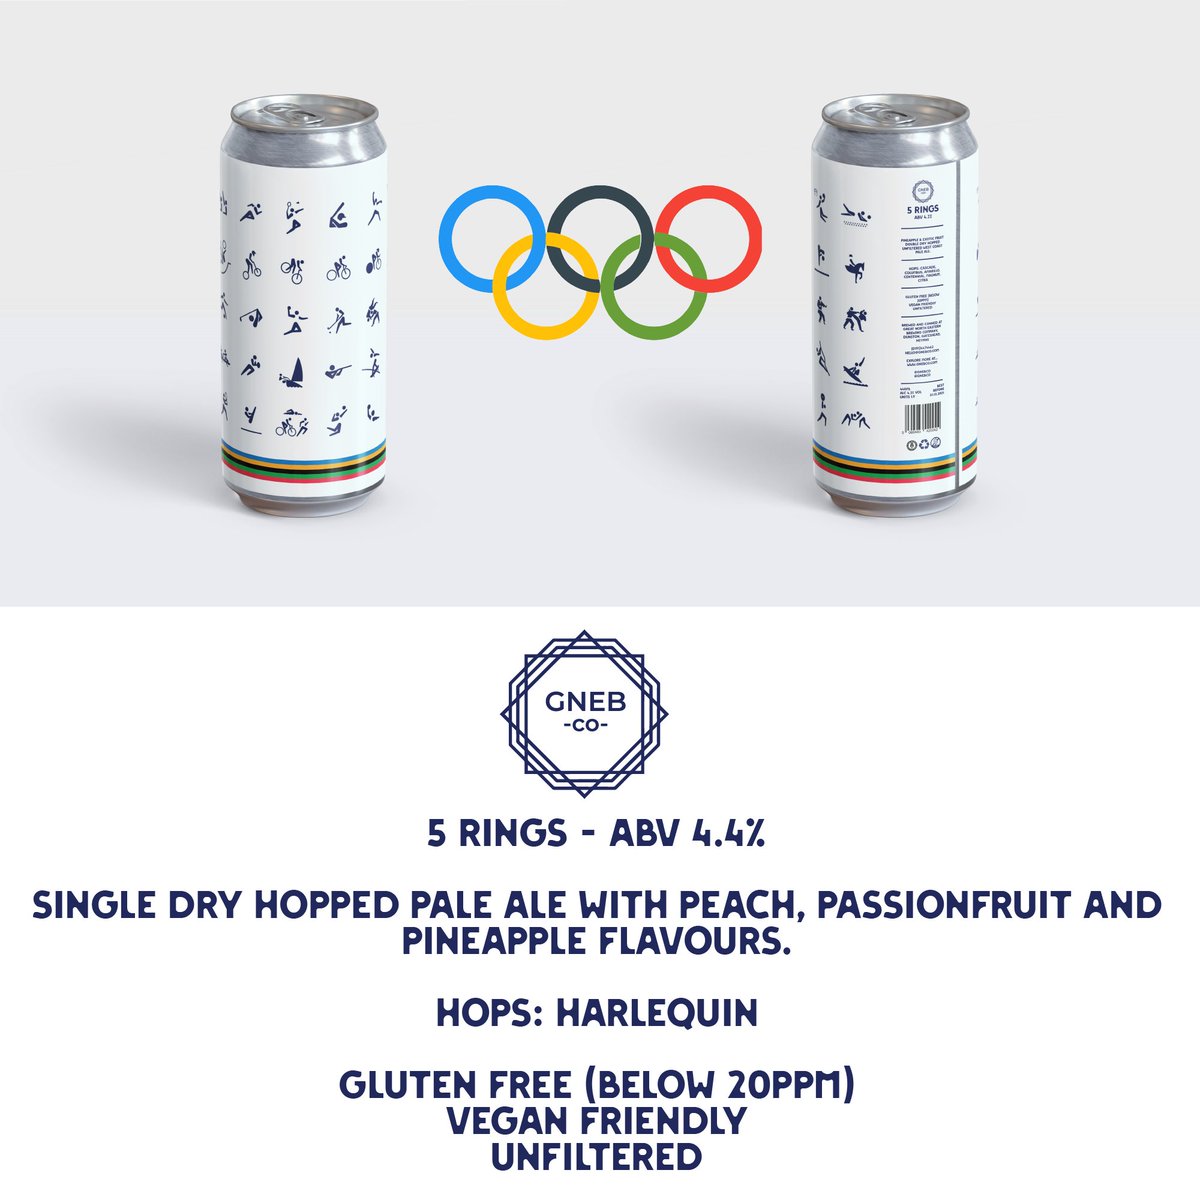 Now Available.... 5 Rings Pale ale. A Limited edition run of cans with only 60 cases available. gnebco.com/.../5-rings-pa…... Also available in cask and 5l mini-cask here👇👇 gnebco.com/.../5-rings-pa…... Trade enquiries call or email Ross: ross@gnebco.com 07510573965 (0191) 4474462